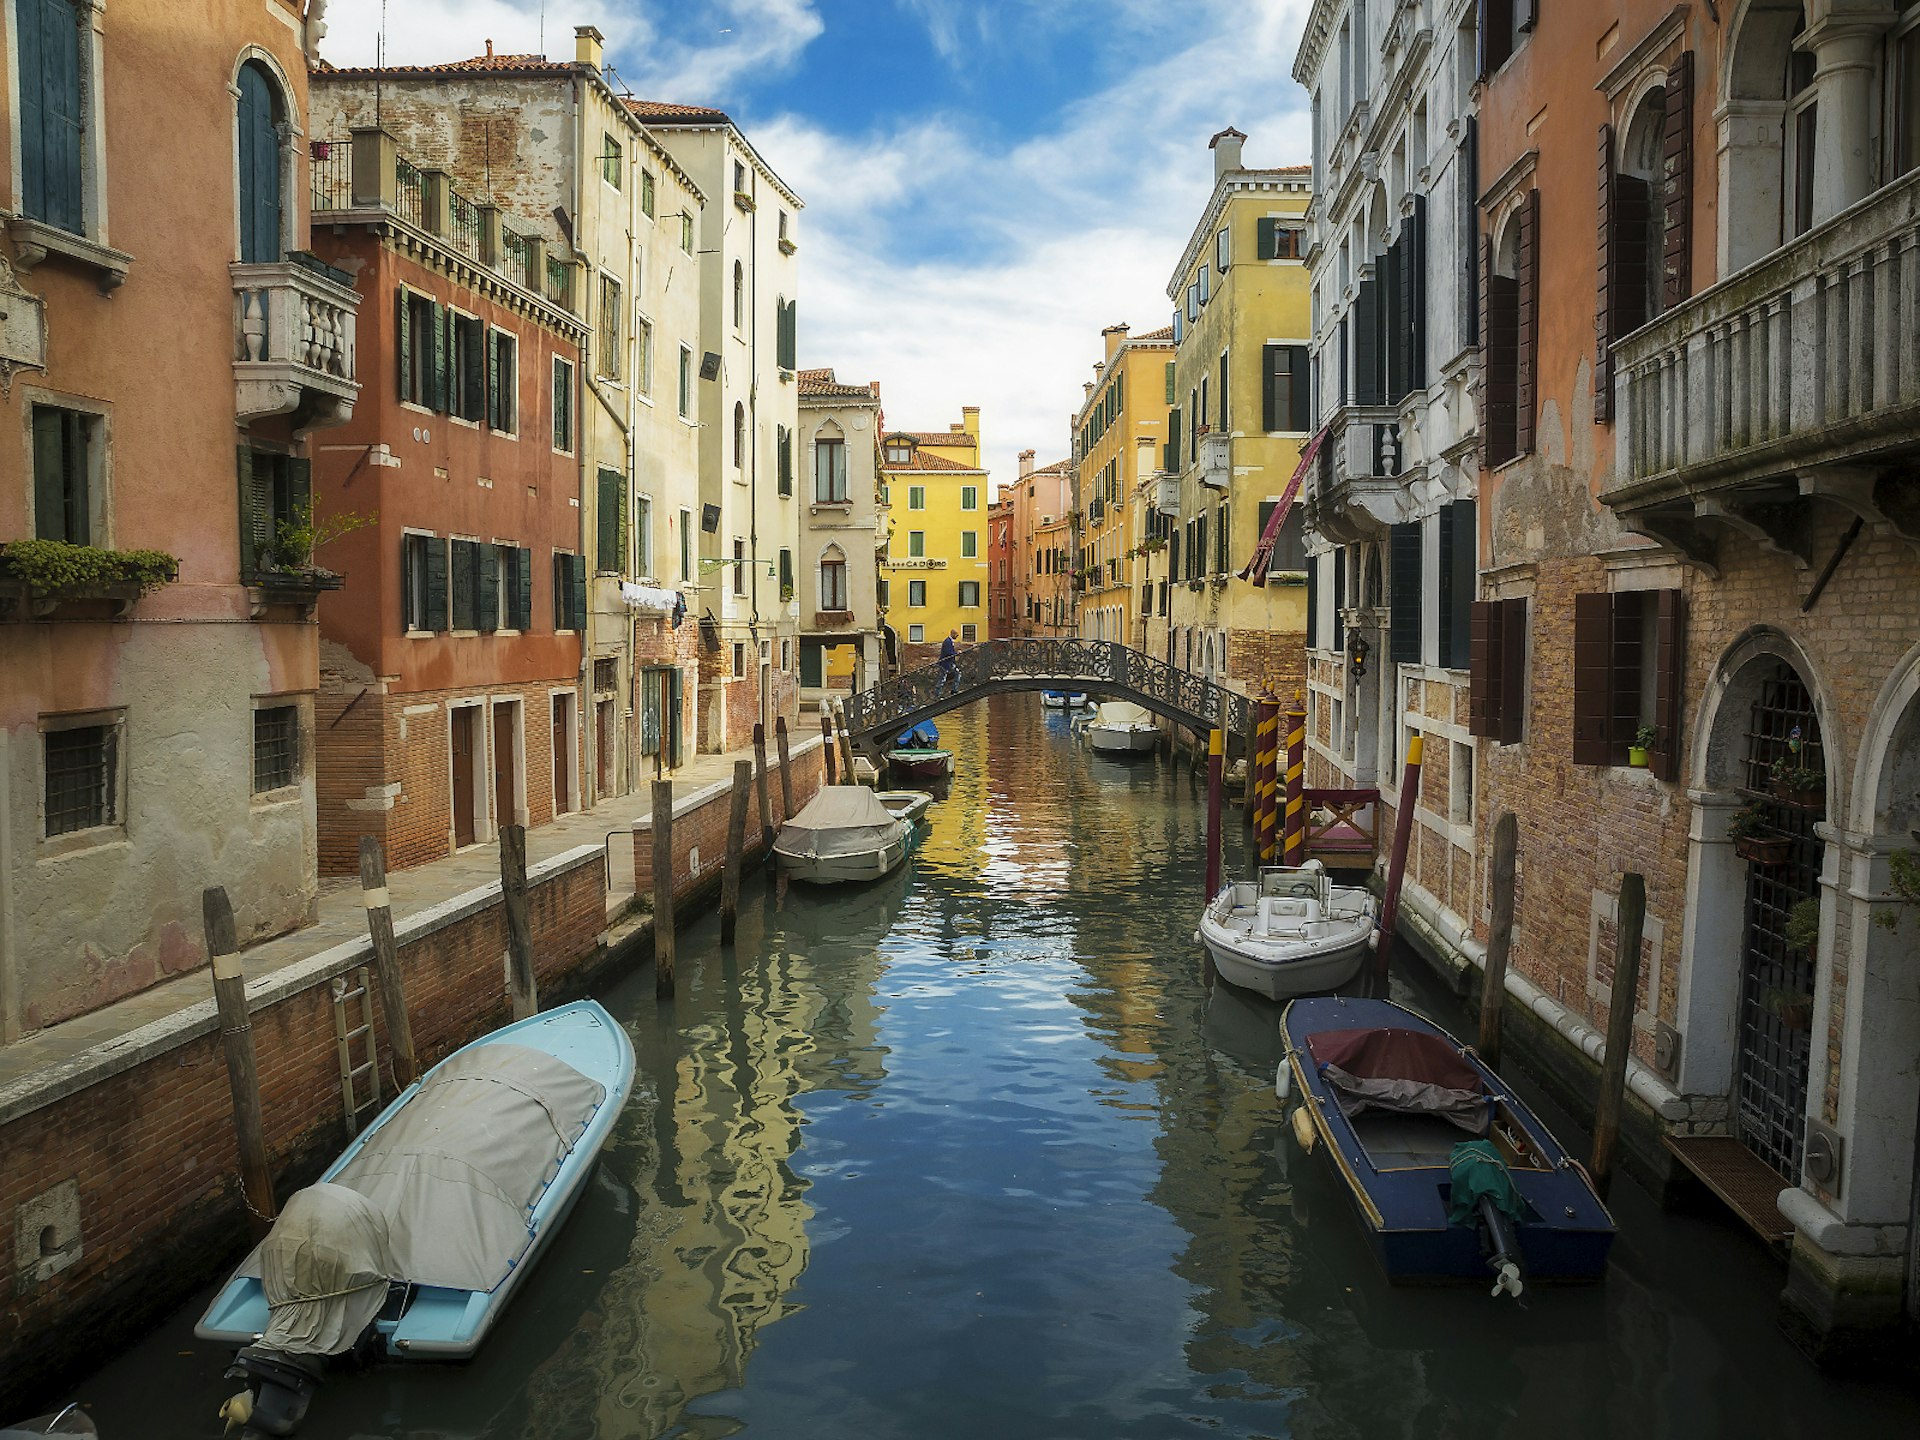 Colourful houses either side of a canal in Cannaregio, Venice © Chase Dekker Wild-Life Images / Shutterstock